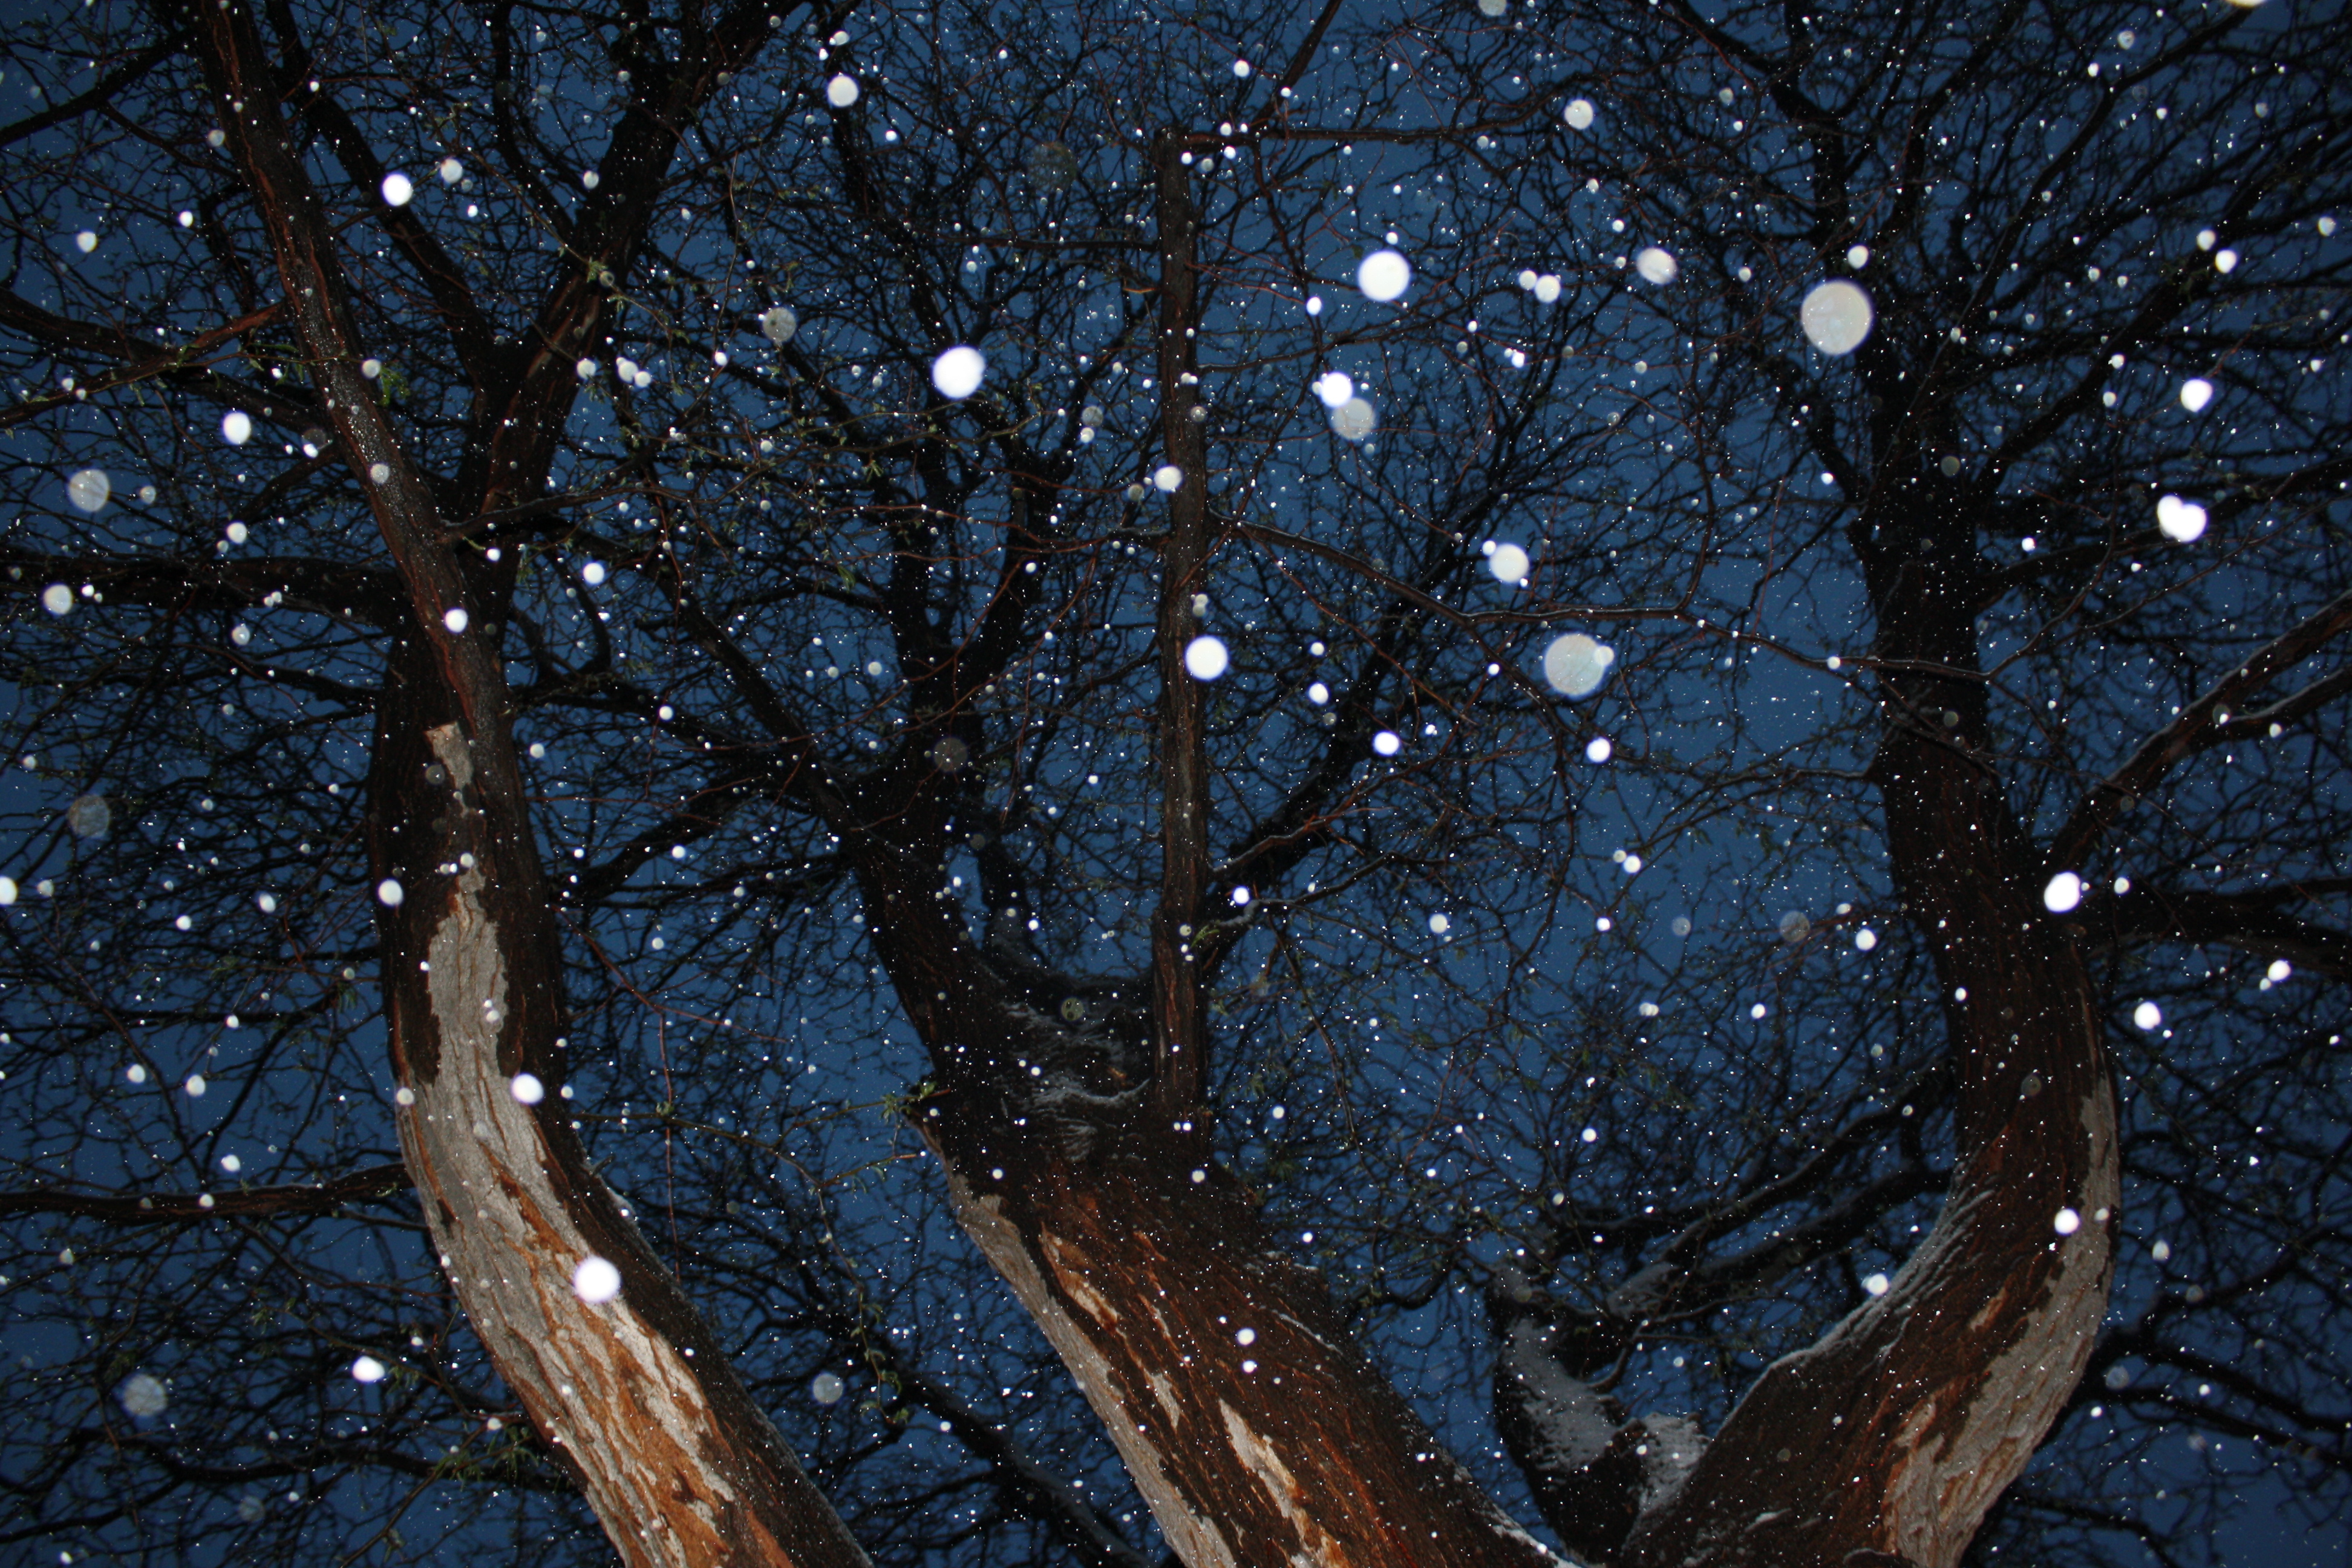 photographing snow falling at night